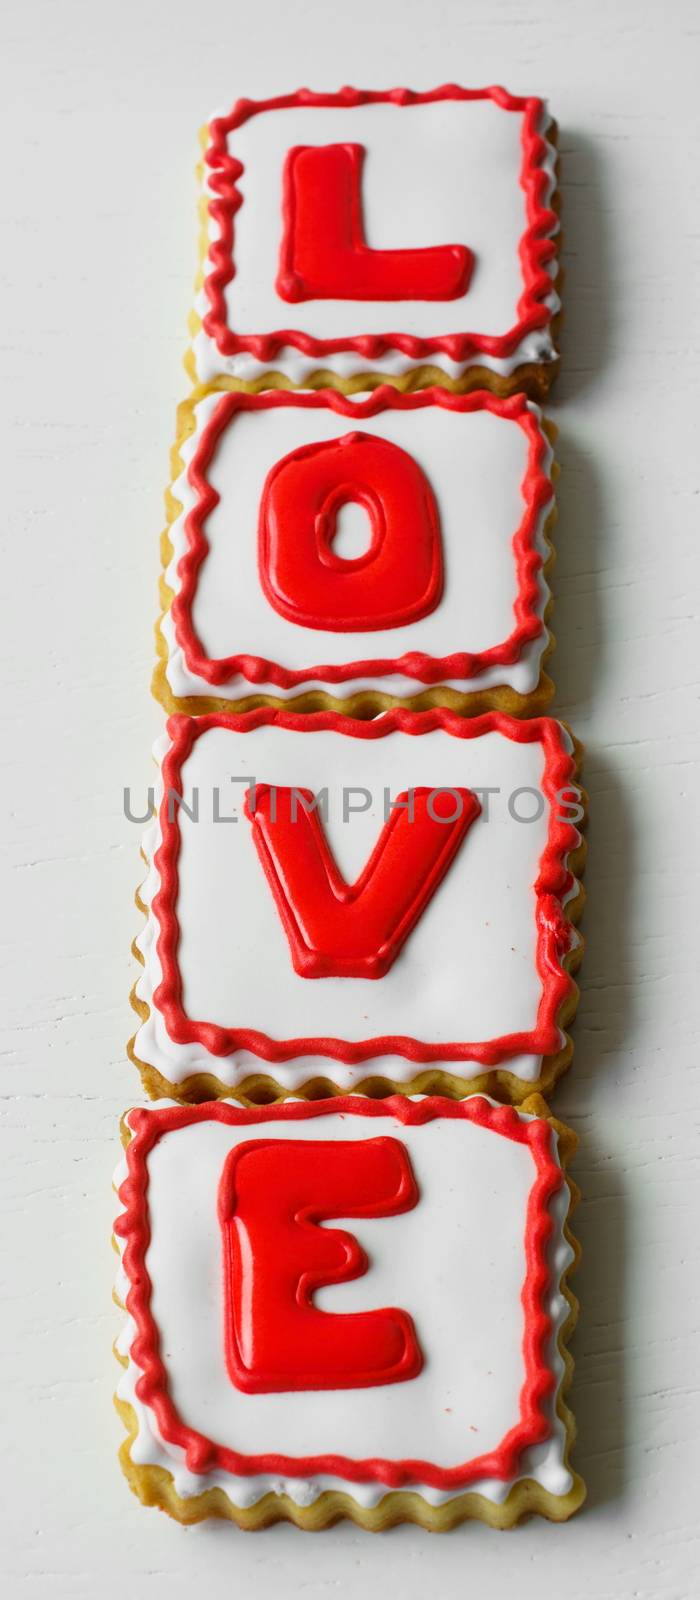 Valentine's Day cookies by yebeka